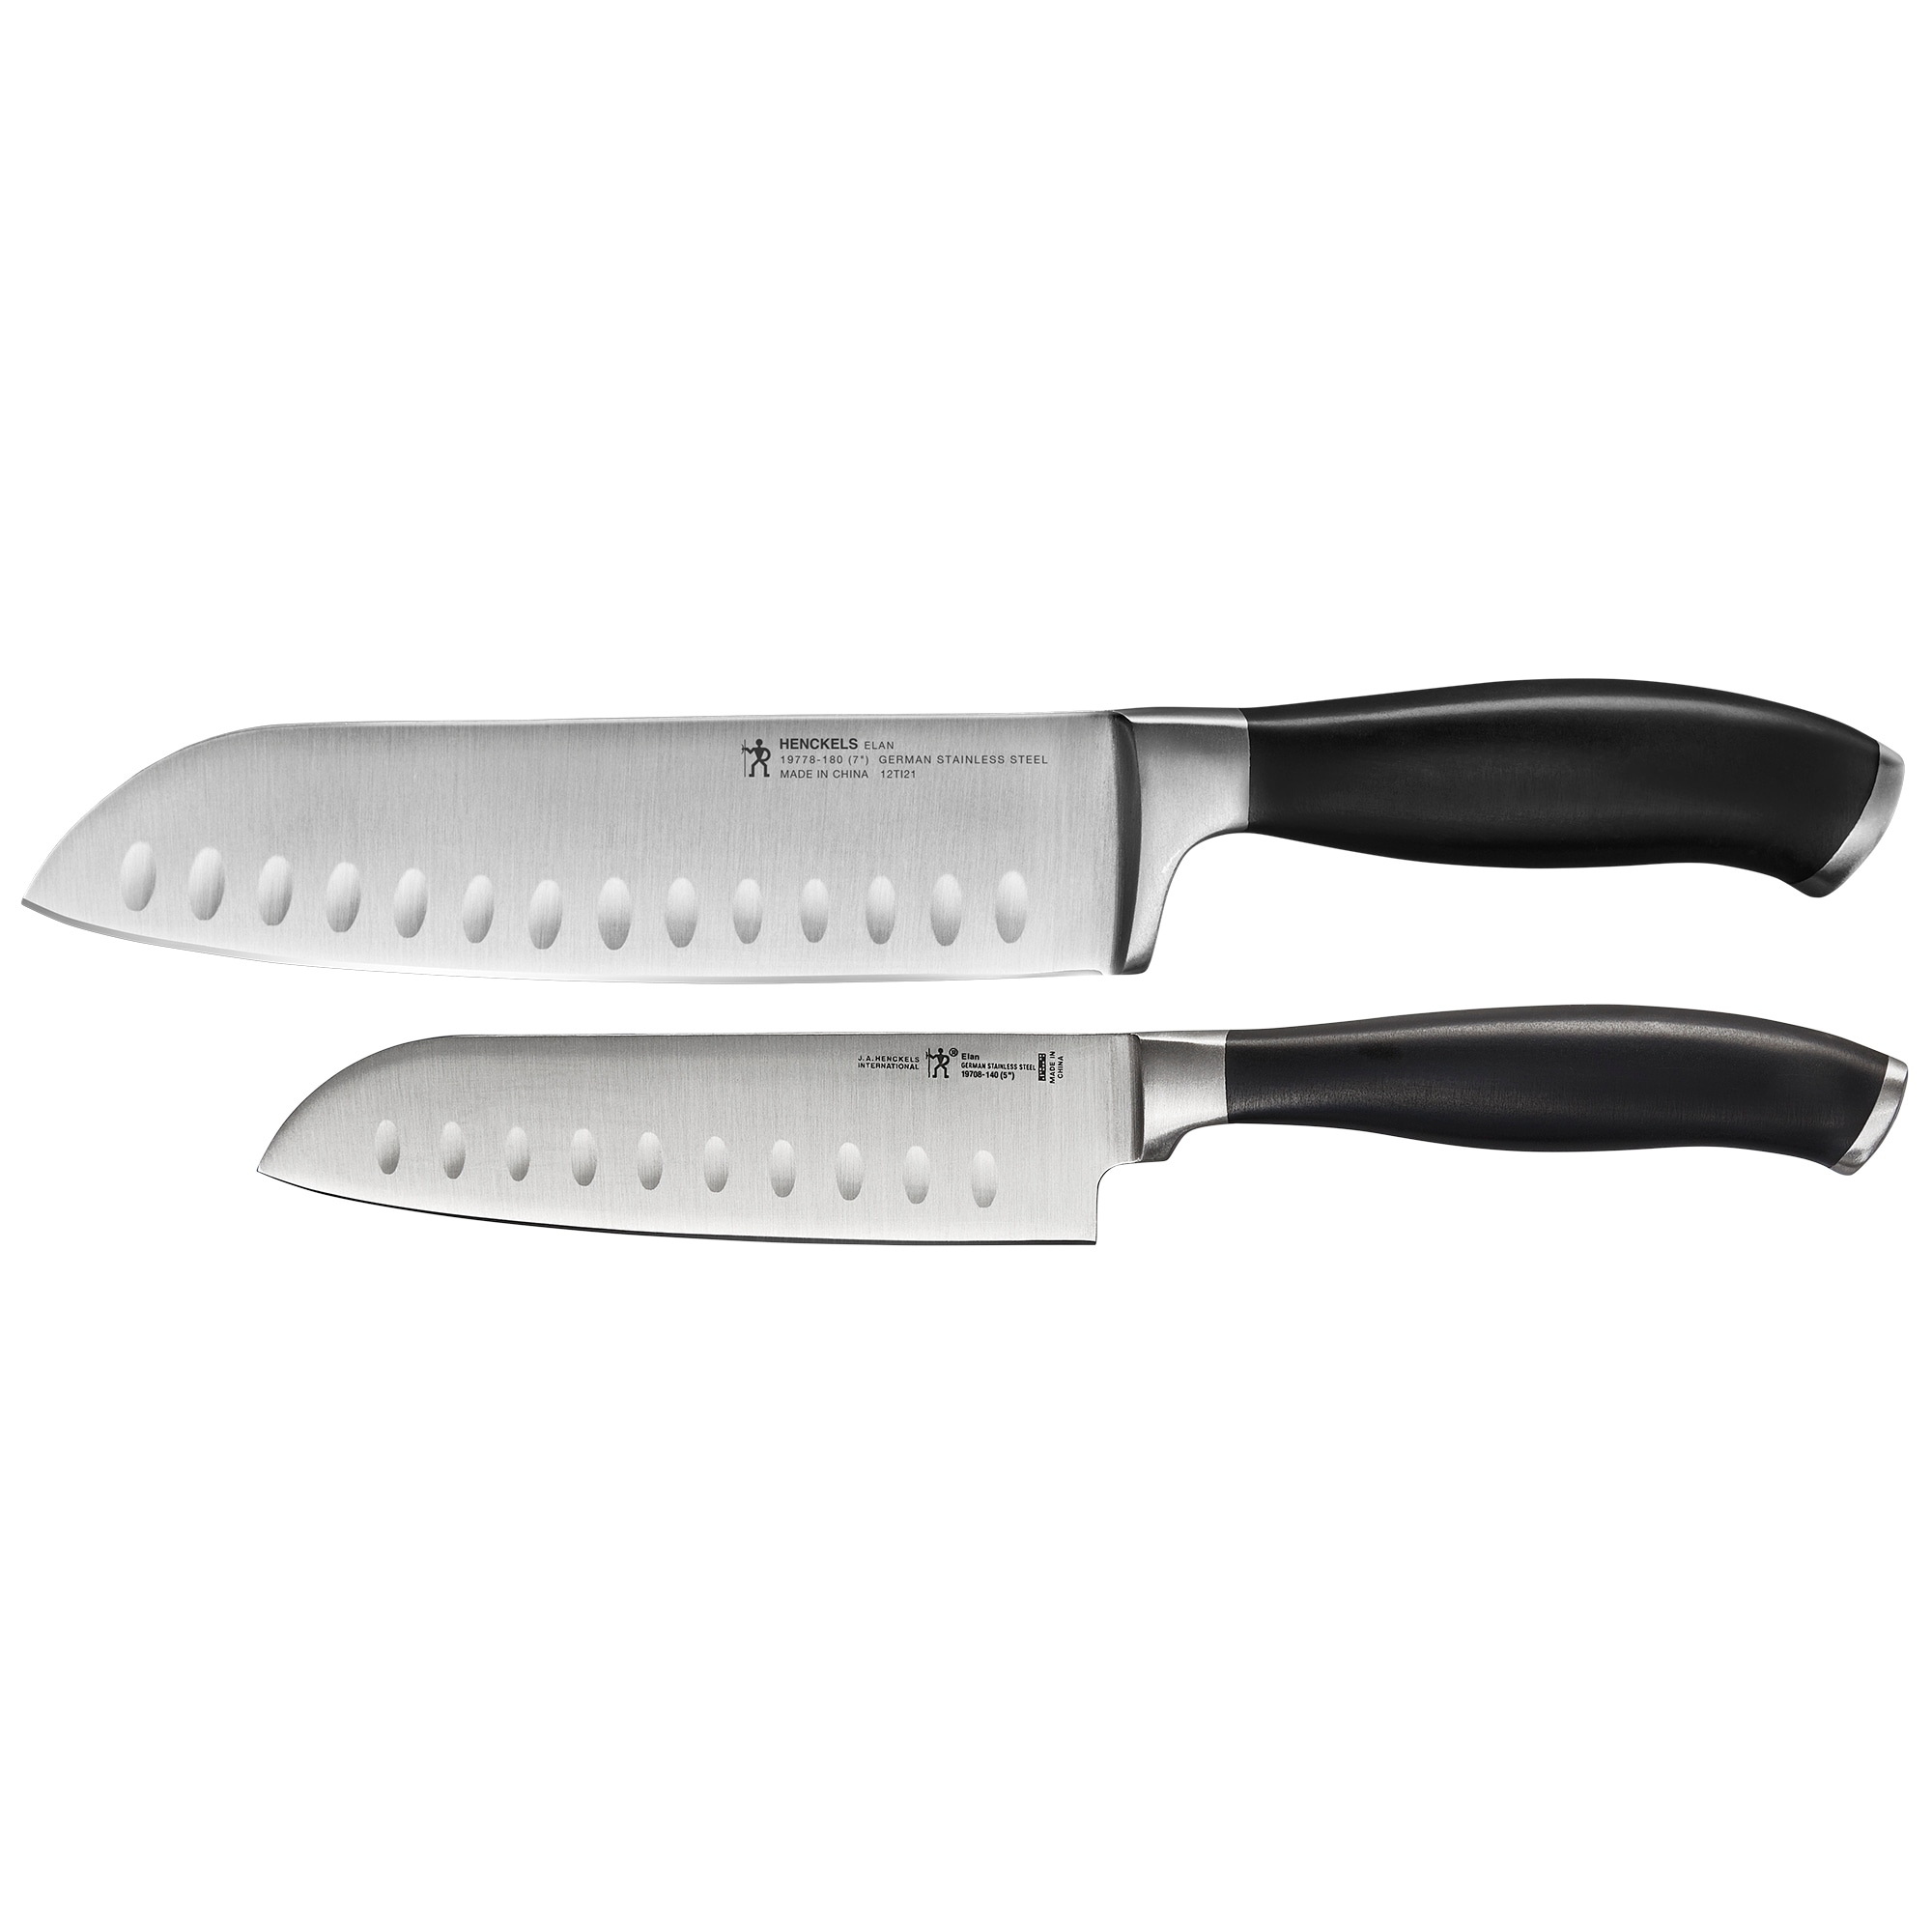 Pampered Chef 8-Inch Chef's Knife Review